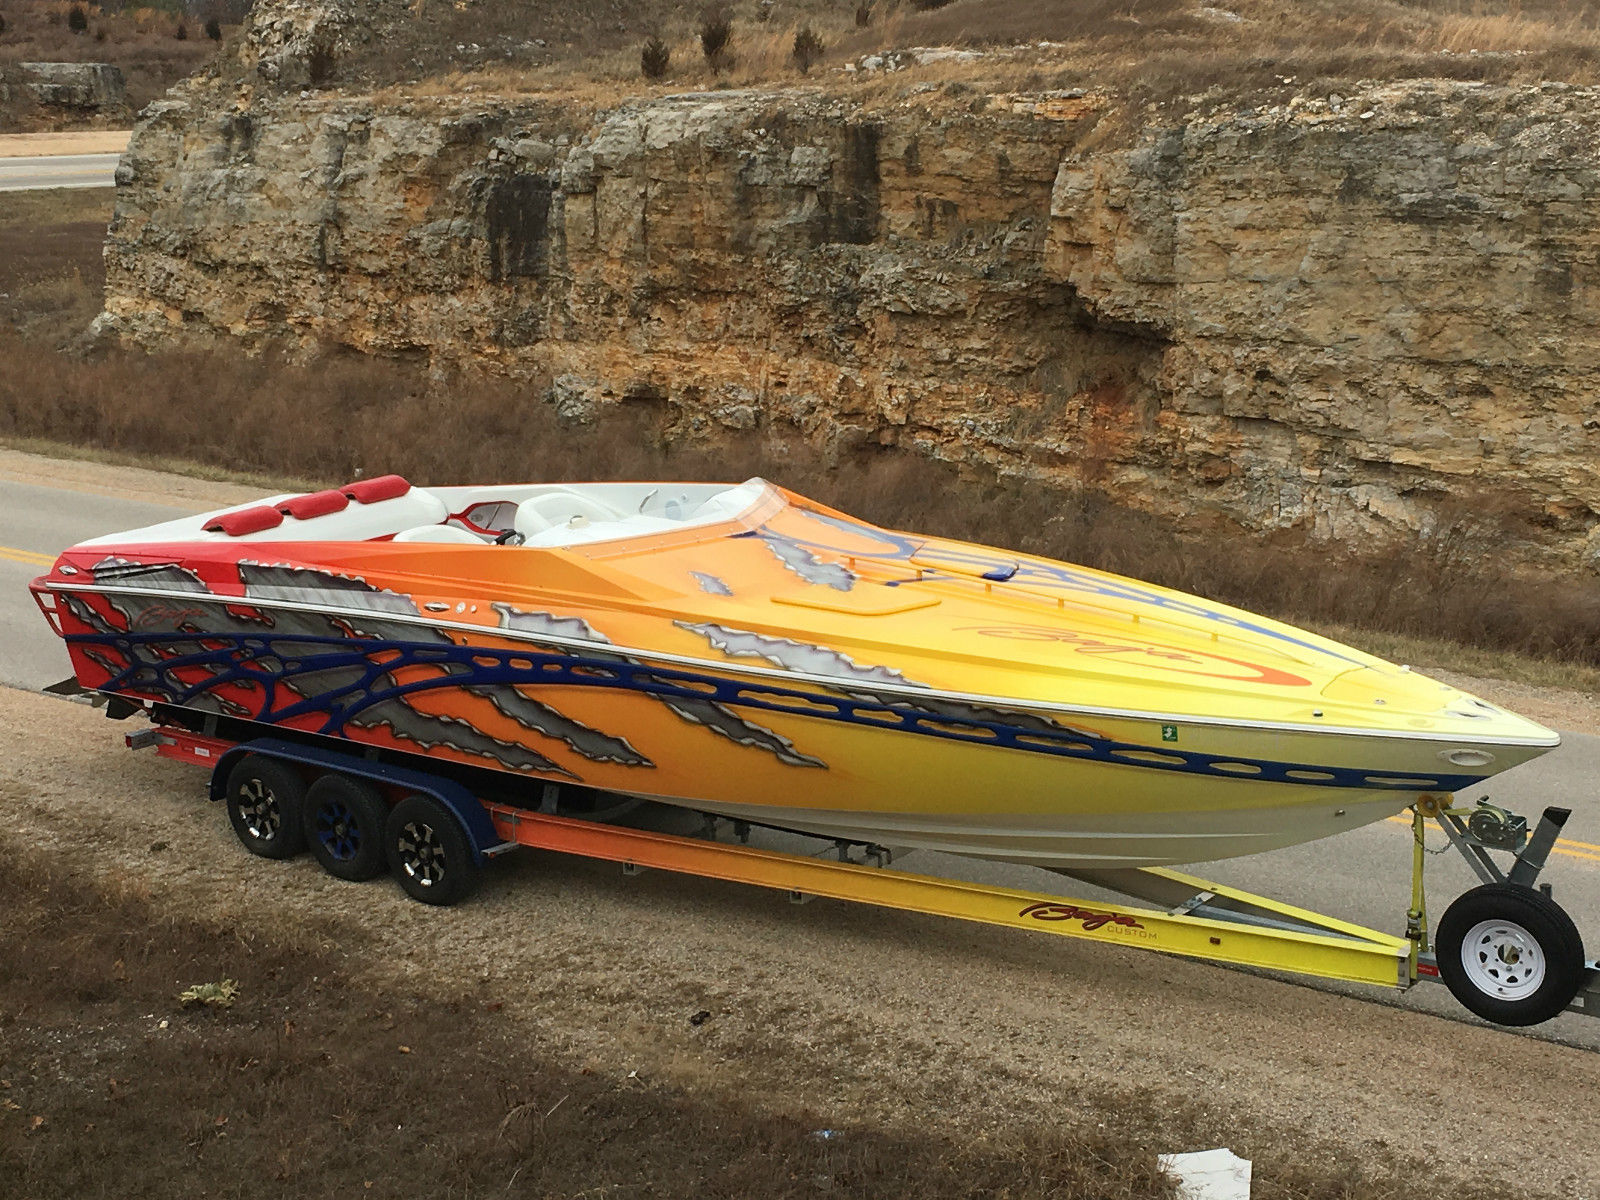 Baja Outlaw 35 2007 for sale for $105,000.